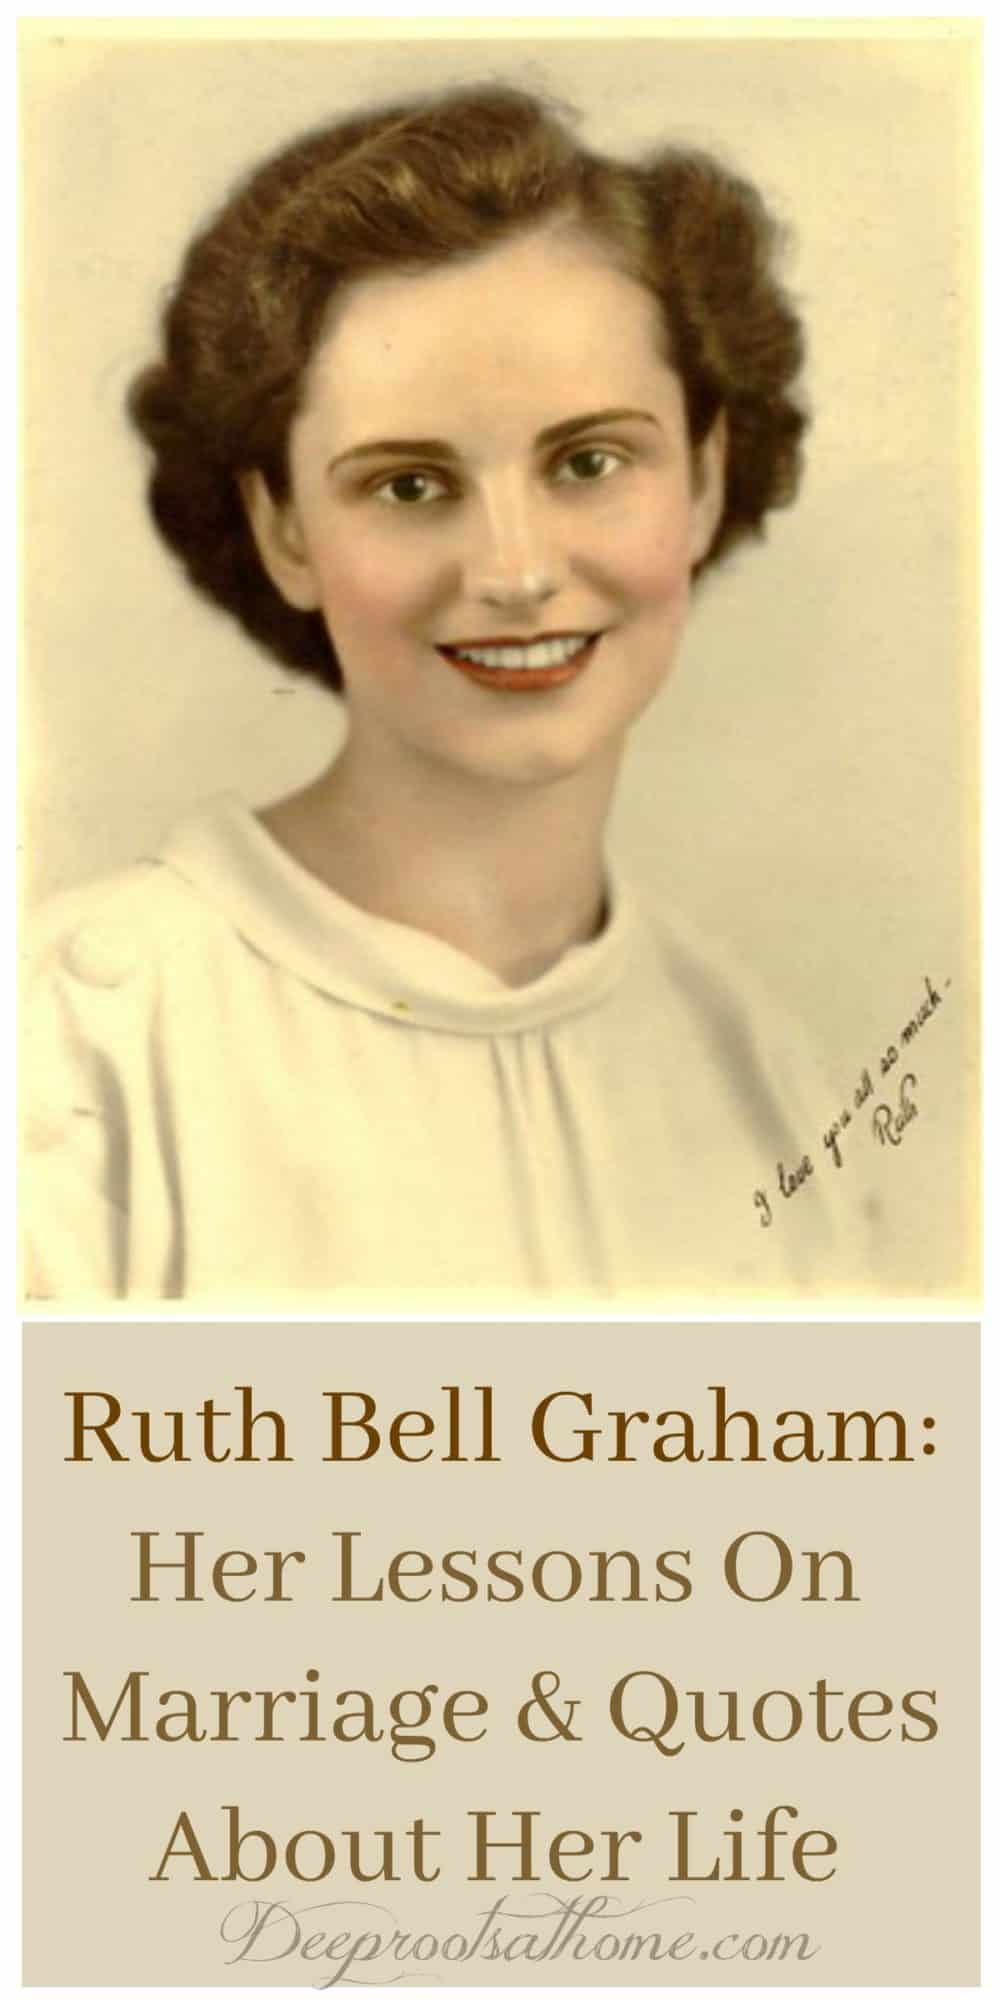 Ruth Bell Graham: Her Lessons On Marriage & Quotes About Her Life, old photo